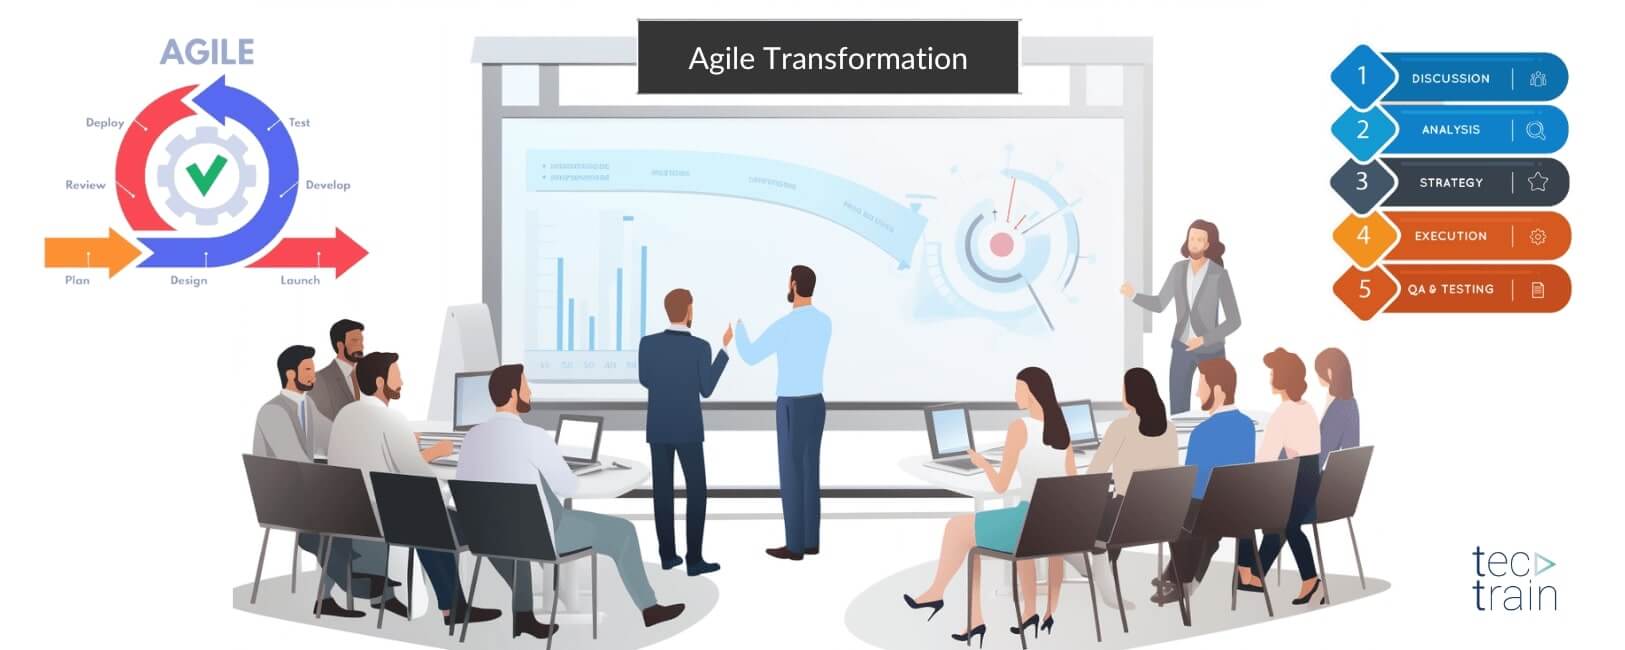 Agile transformation makes companies more collaborative and enables them to do more by serving the interests of their users.